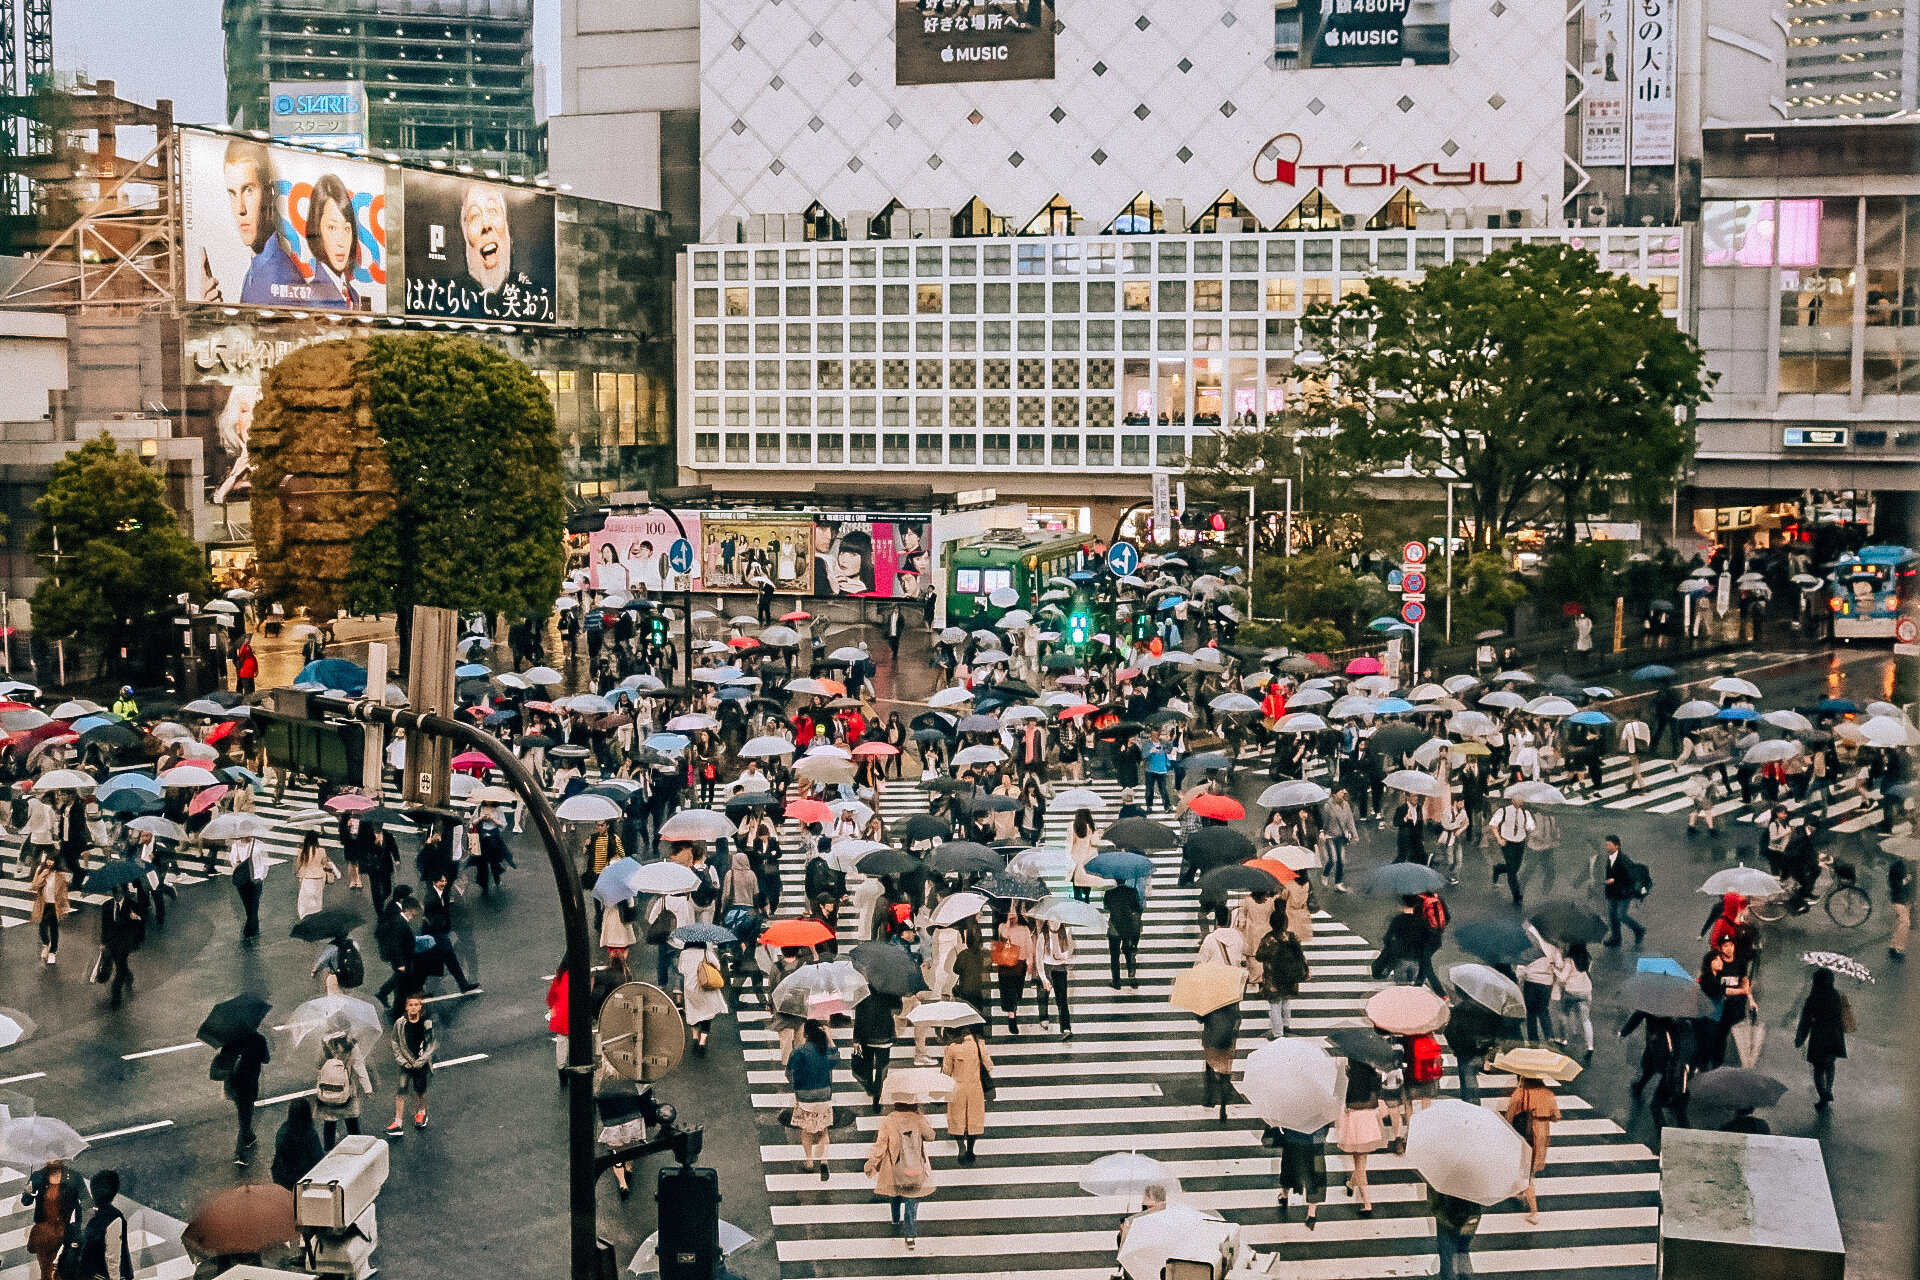 Many people with umbrellas crossing the street at Shibuya crossing.